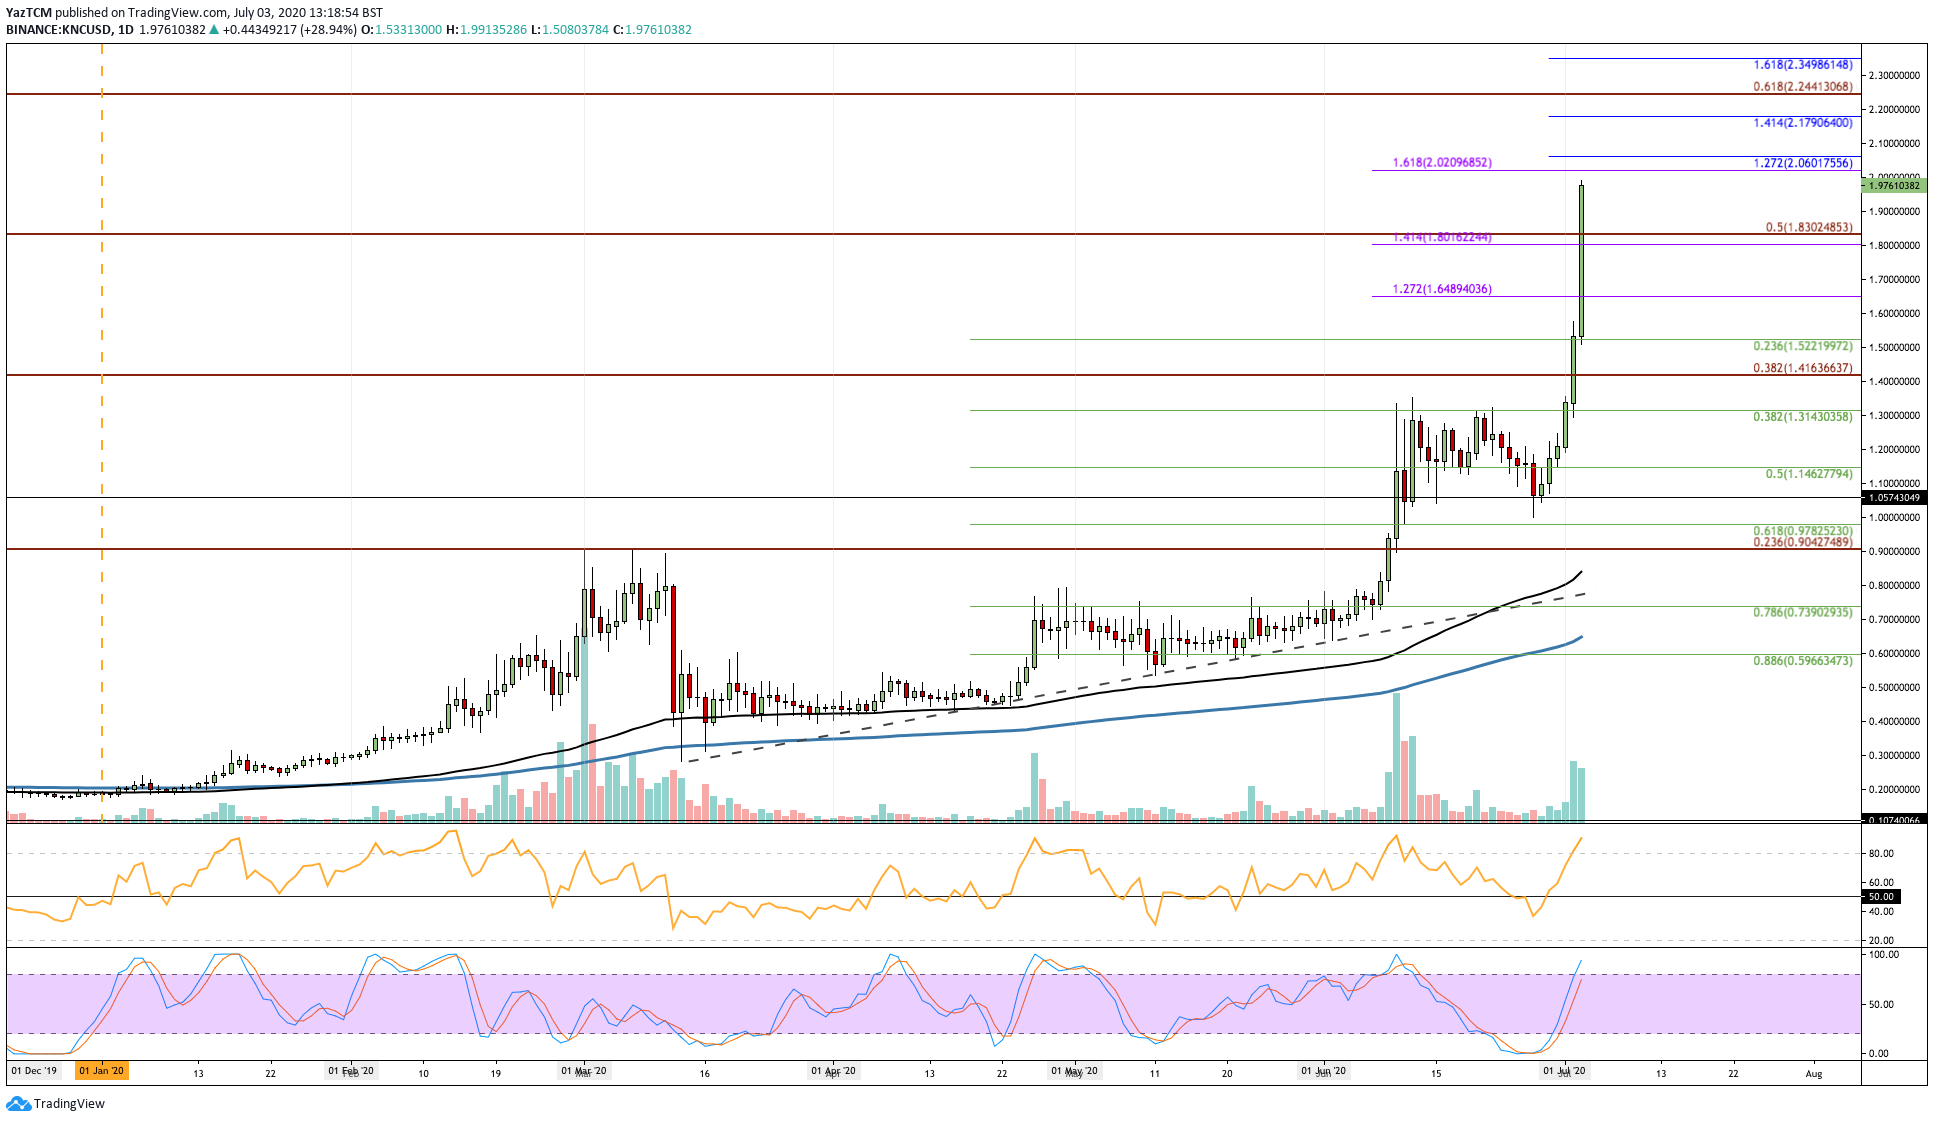 Crypto Price Analysis & Overview July 3: Bitcoin, Ethereum, Ripple, Kyber Network, and Bancor